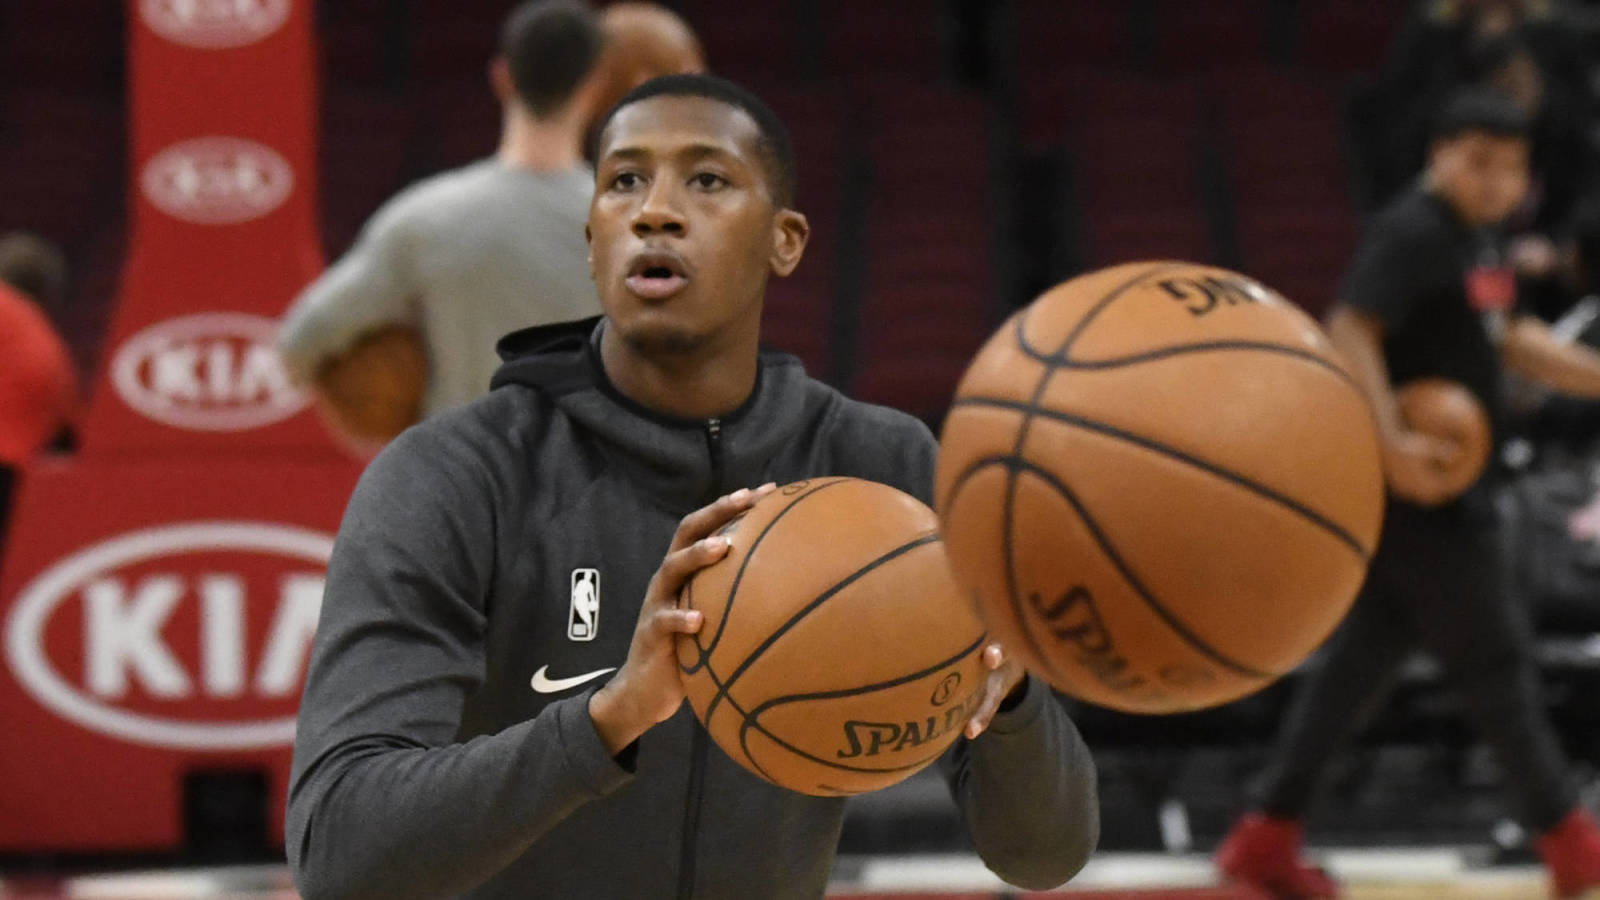 Kris Dunn expected to make debut with Hawks in March